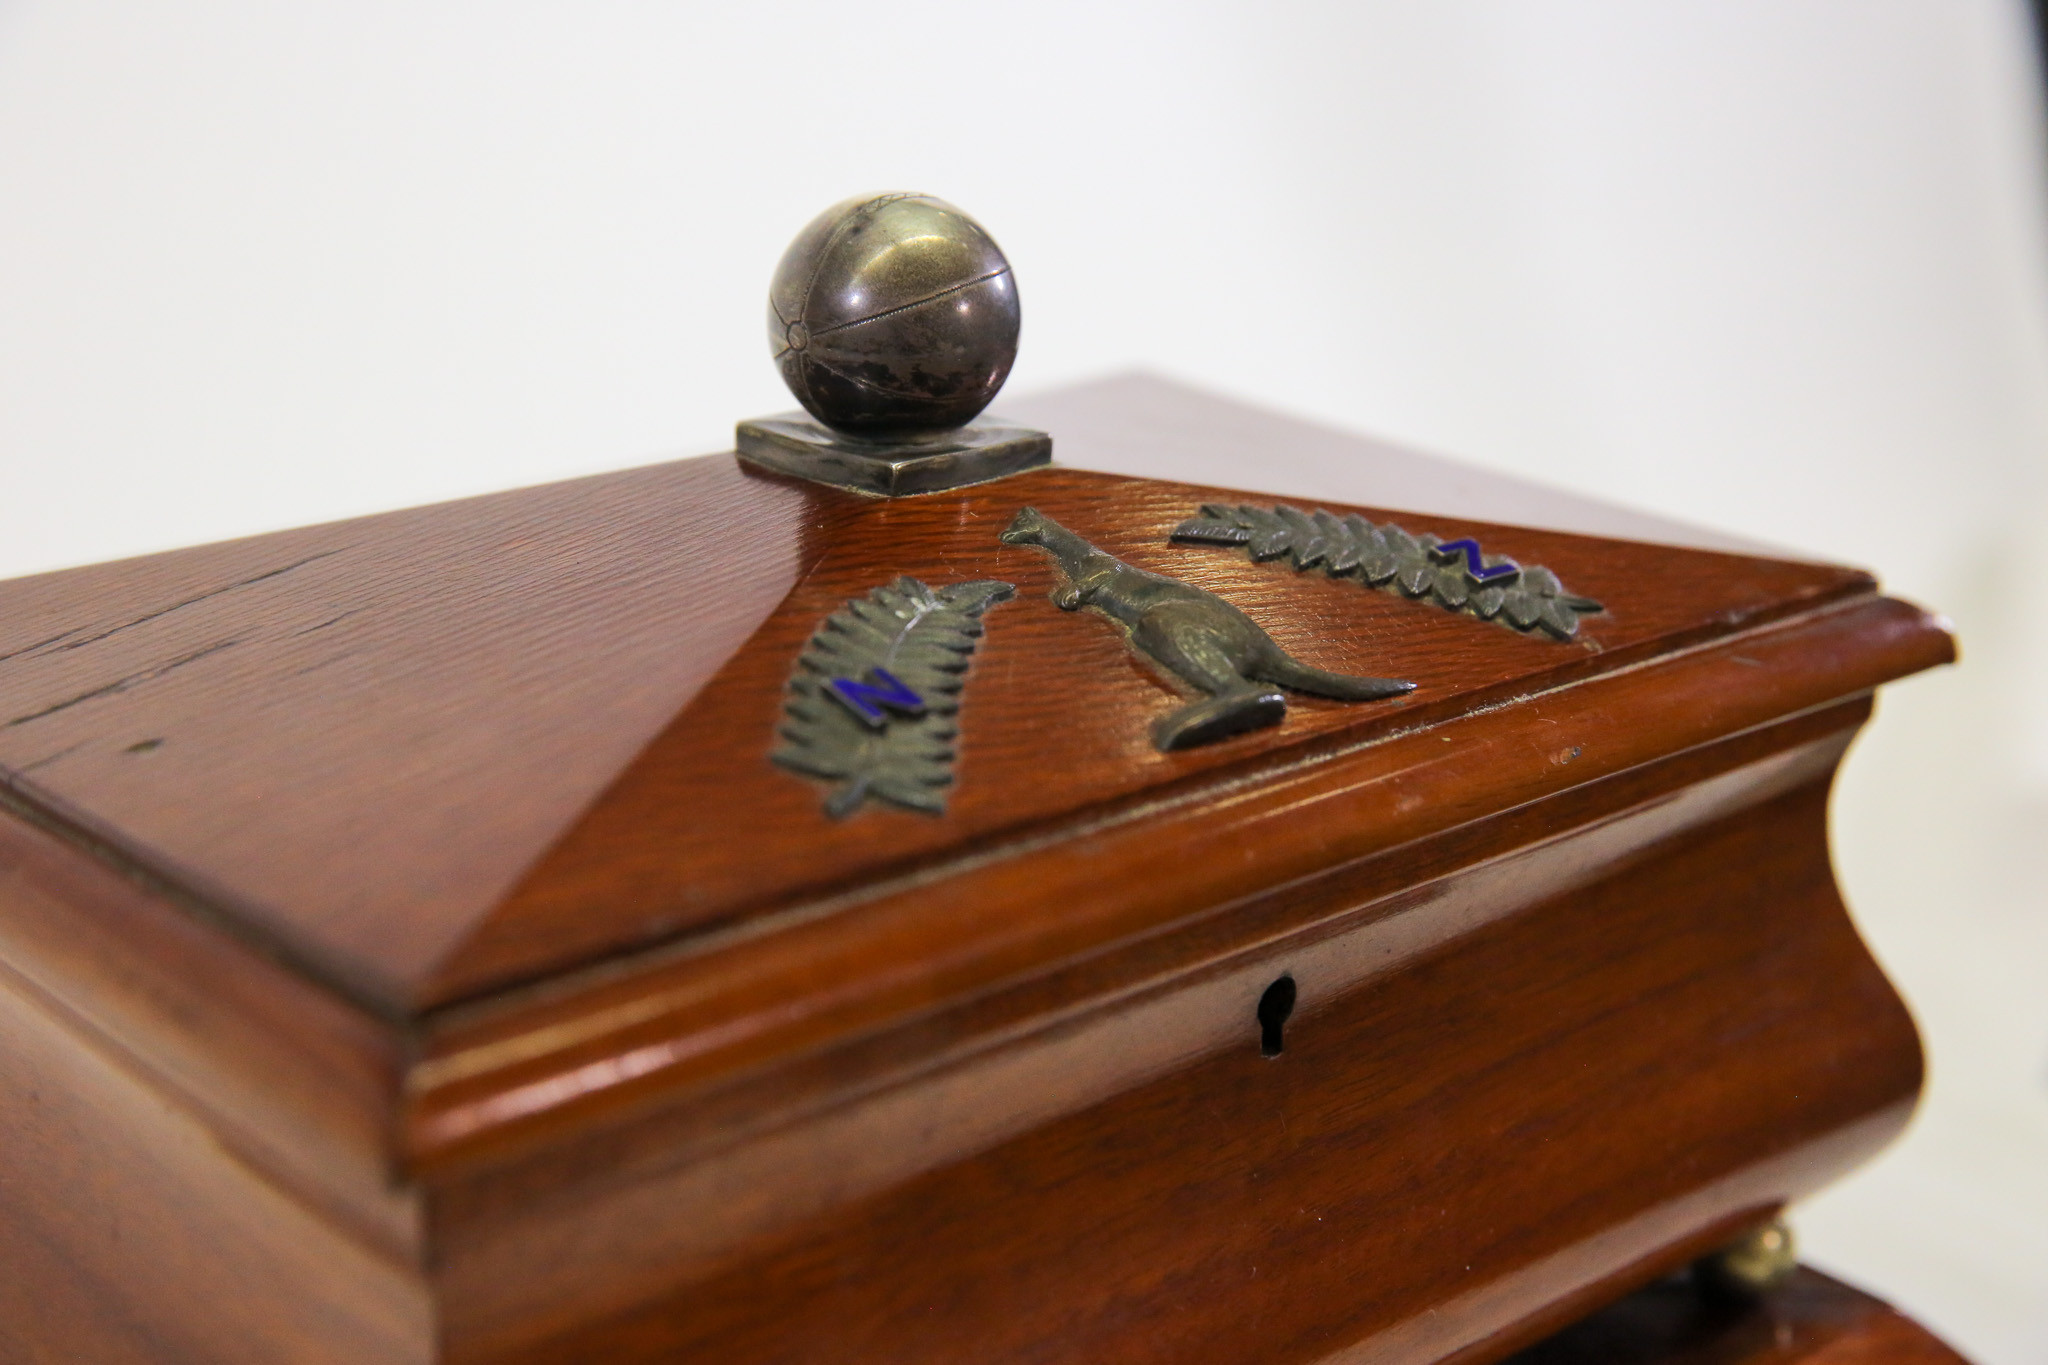 The case of the casket depicts the emblems of both New Zealand and Australia ©Football Australia